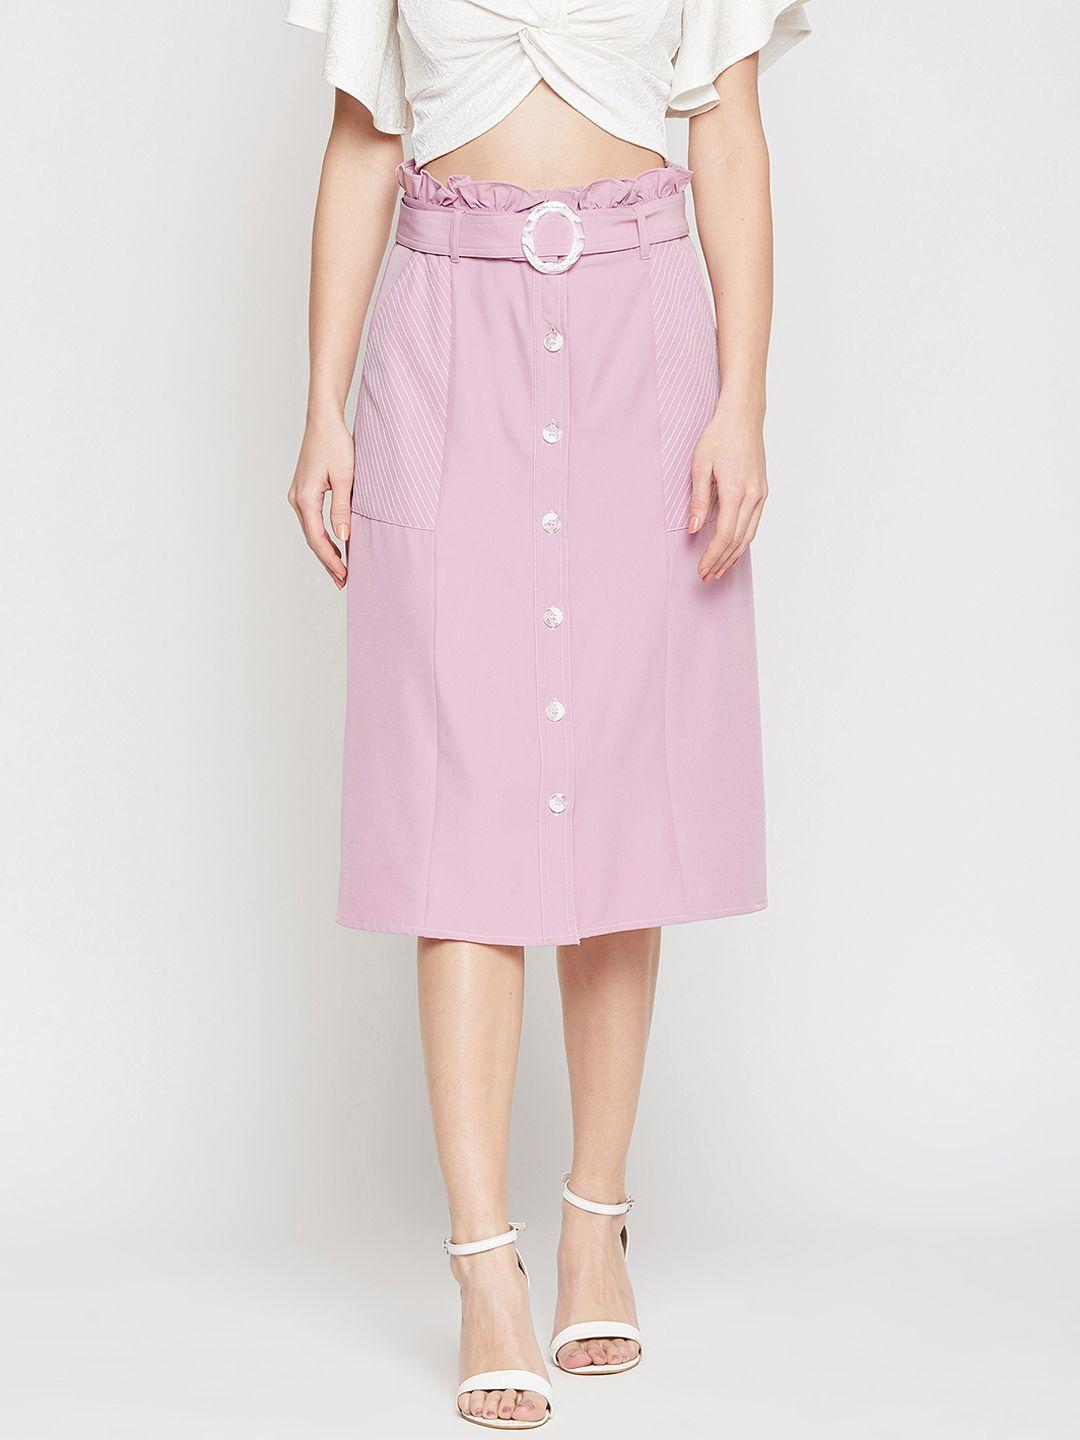 marie claire women pink solid a-line midi skirt